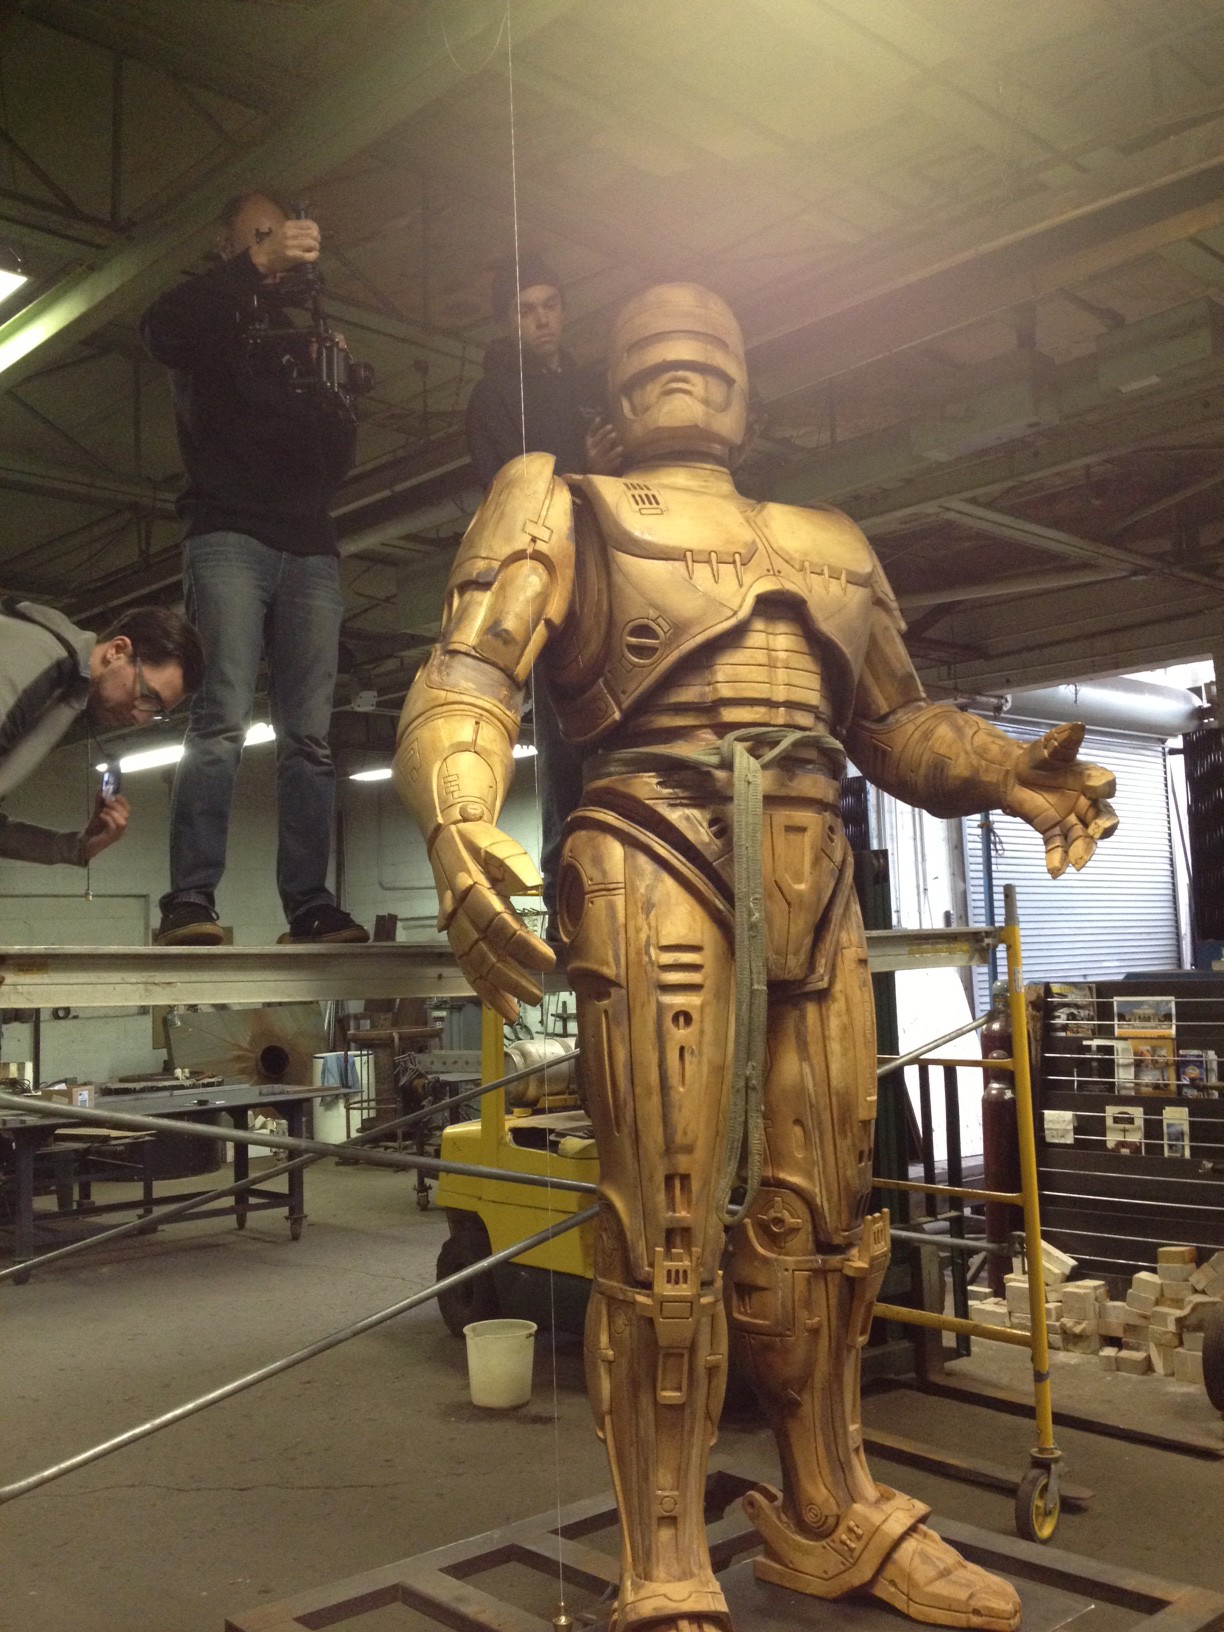 Take a Look at Detroit's RoboCop Statue Local News